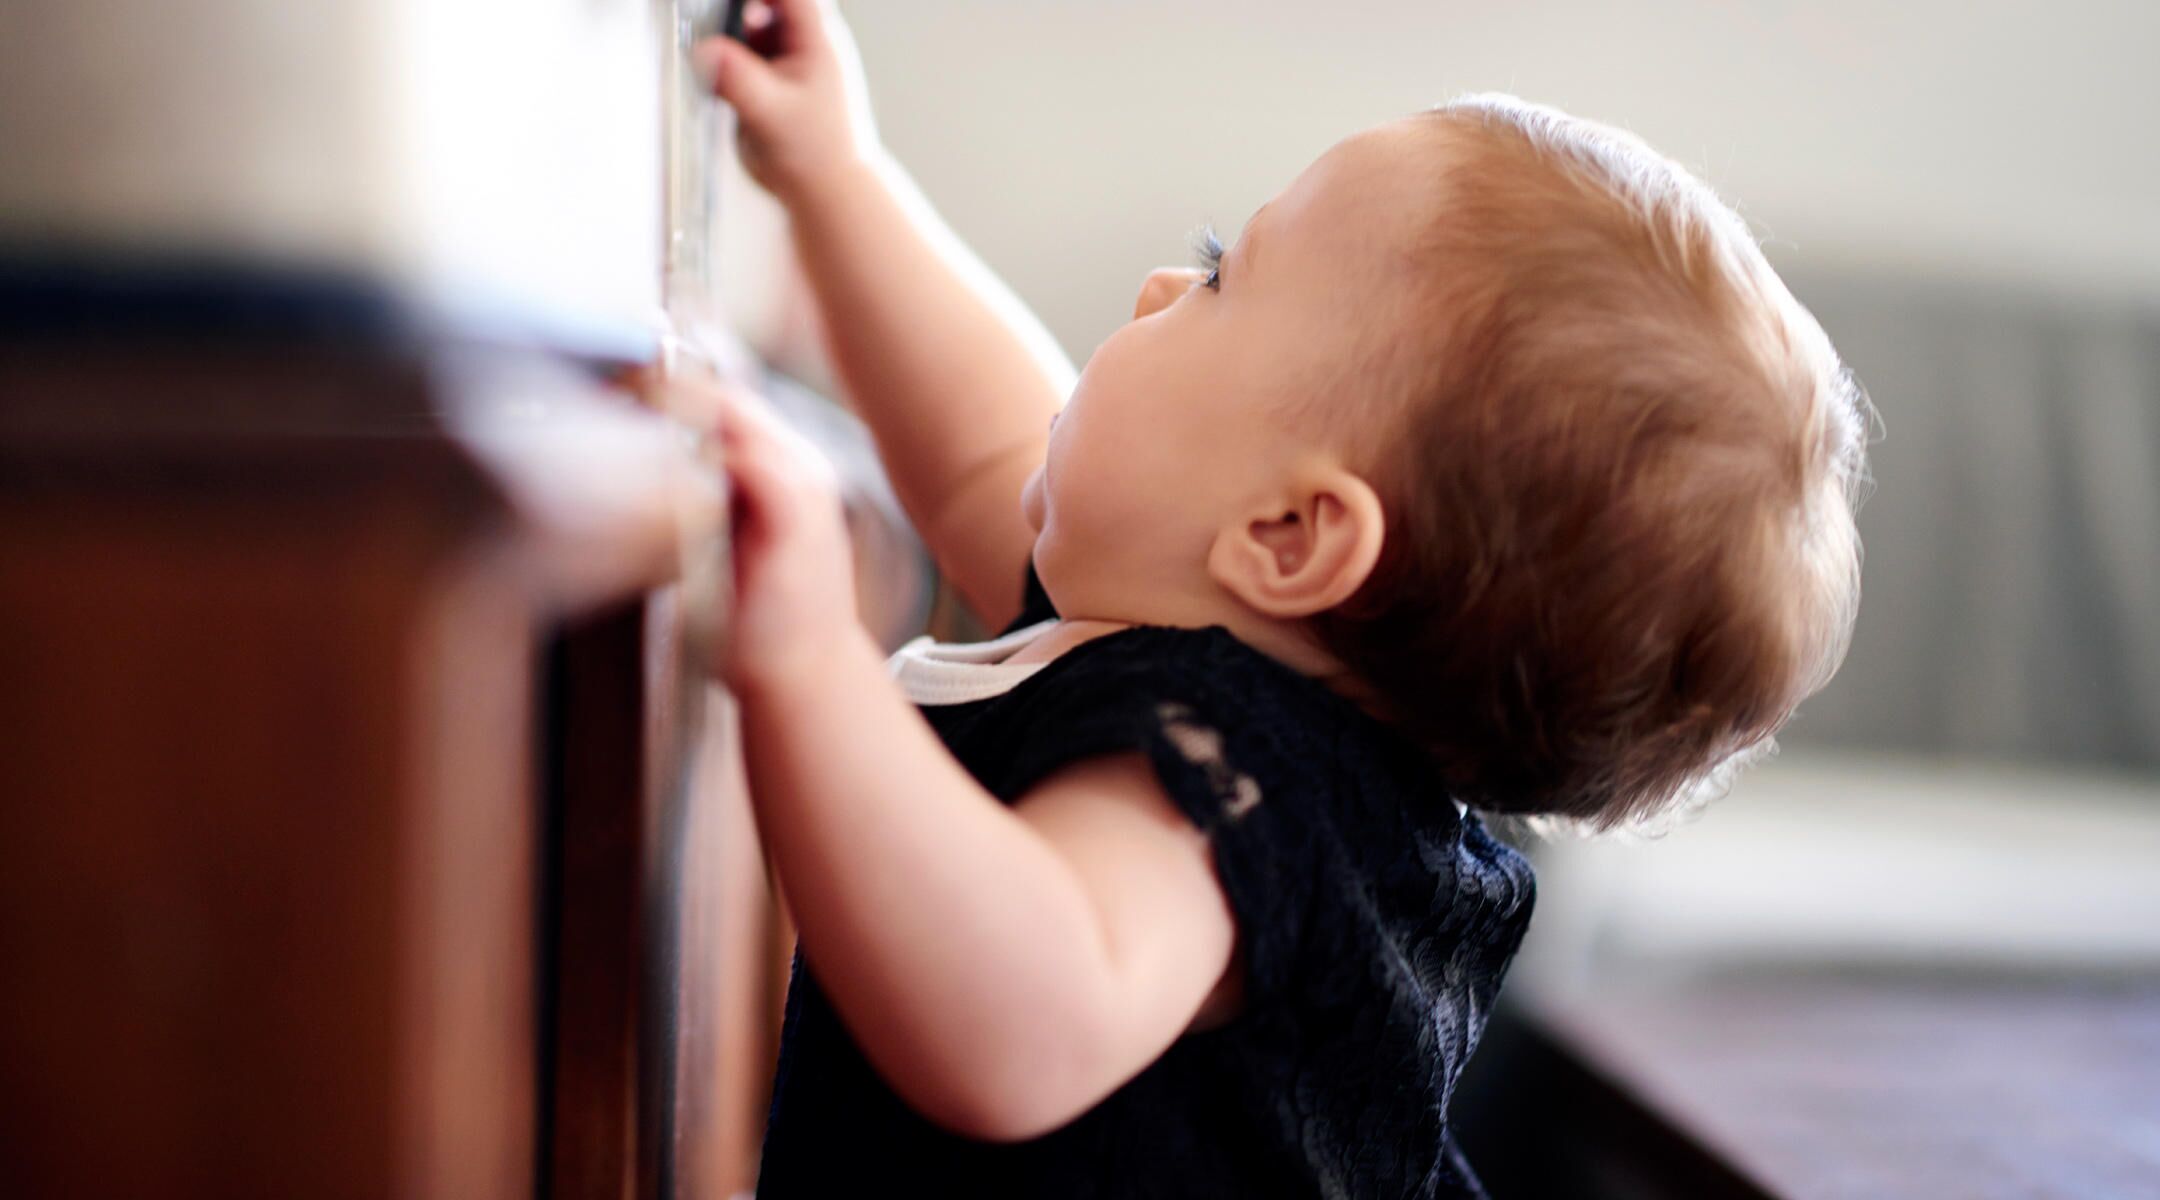 Baby Proofing Checklist: Before Baby Comes Home